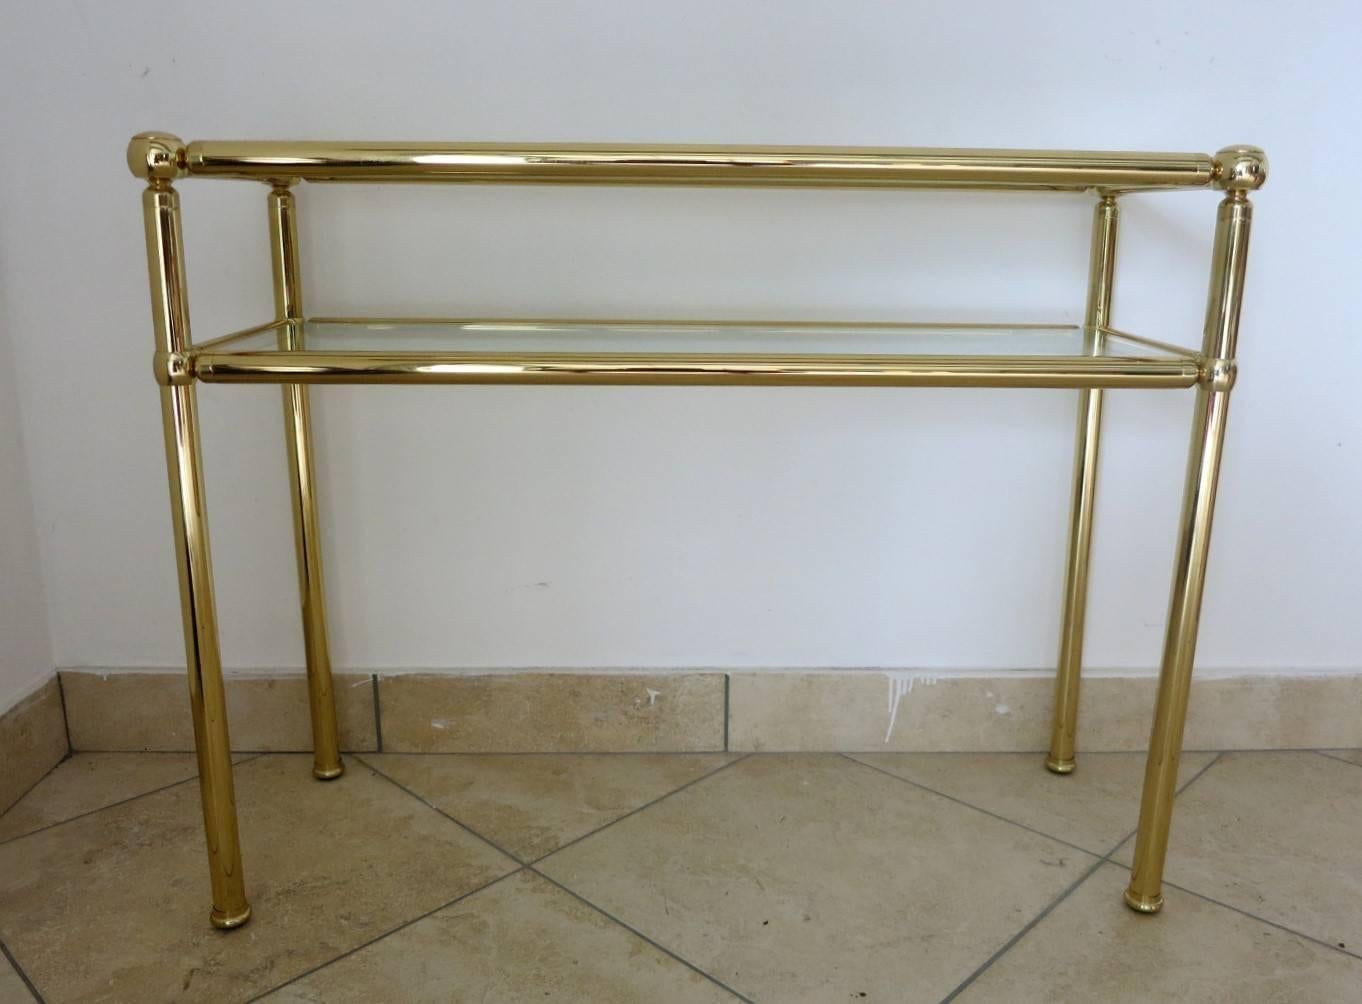 Pair of Italian midcentury brass console table, made in Italy 1950s.